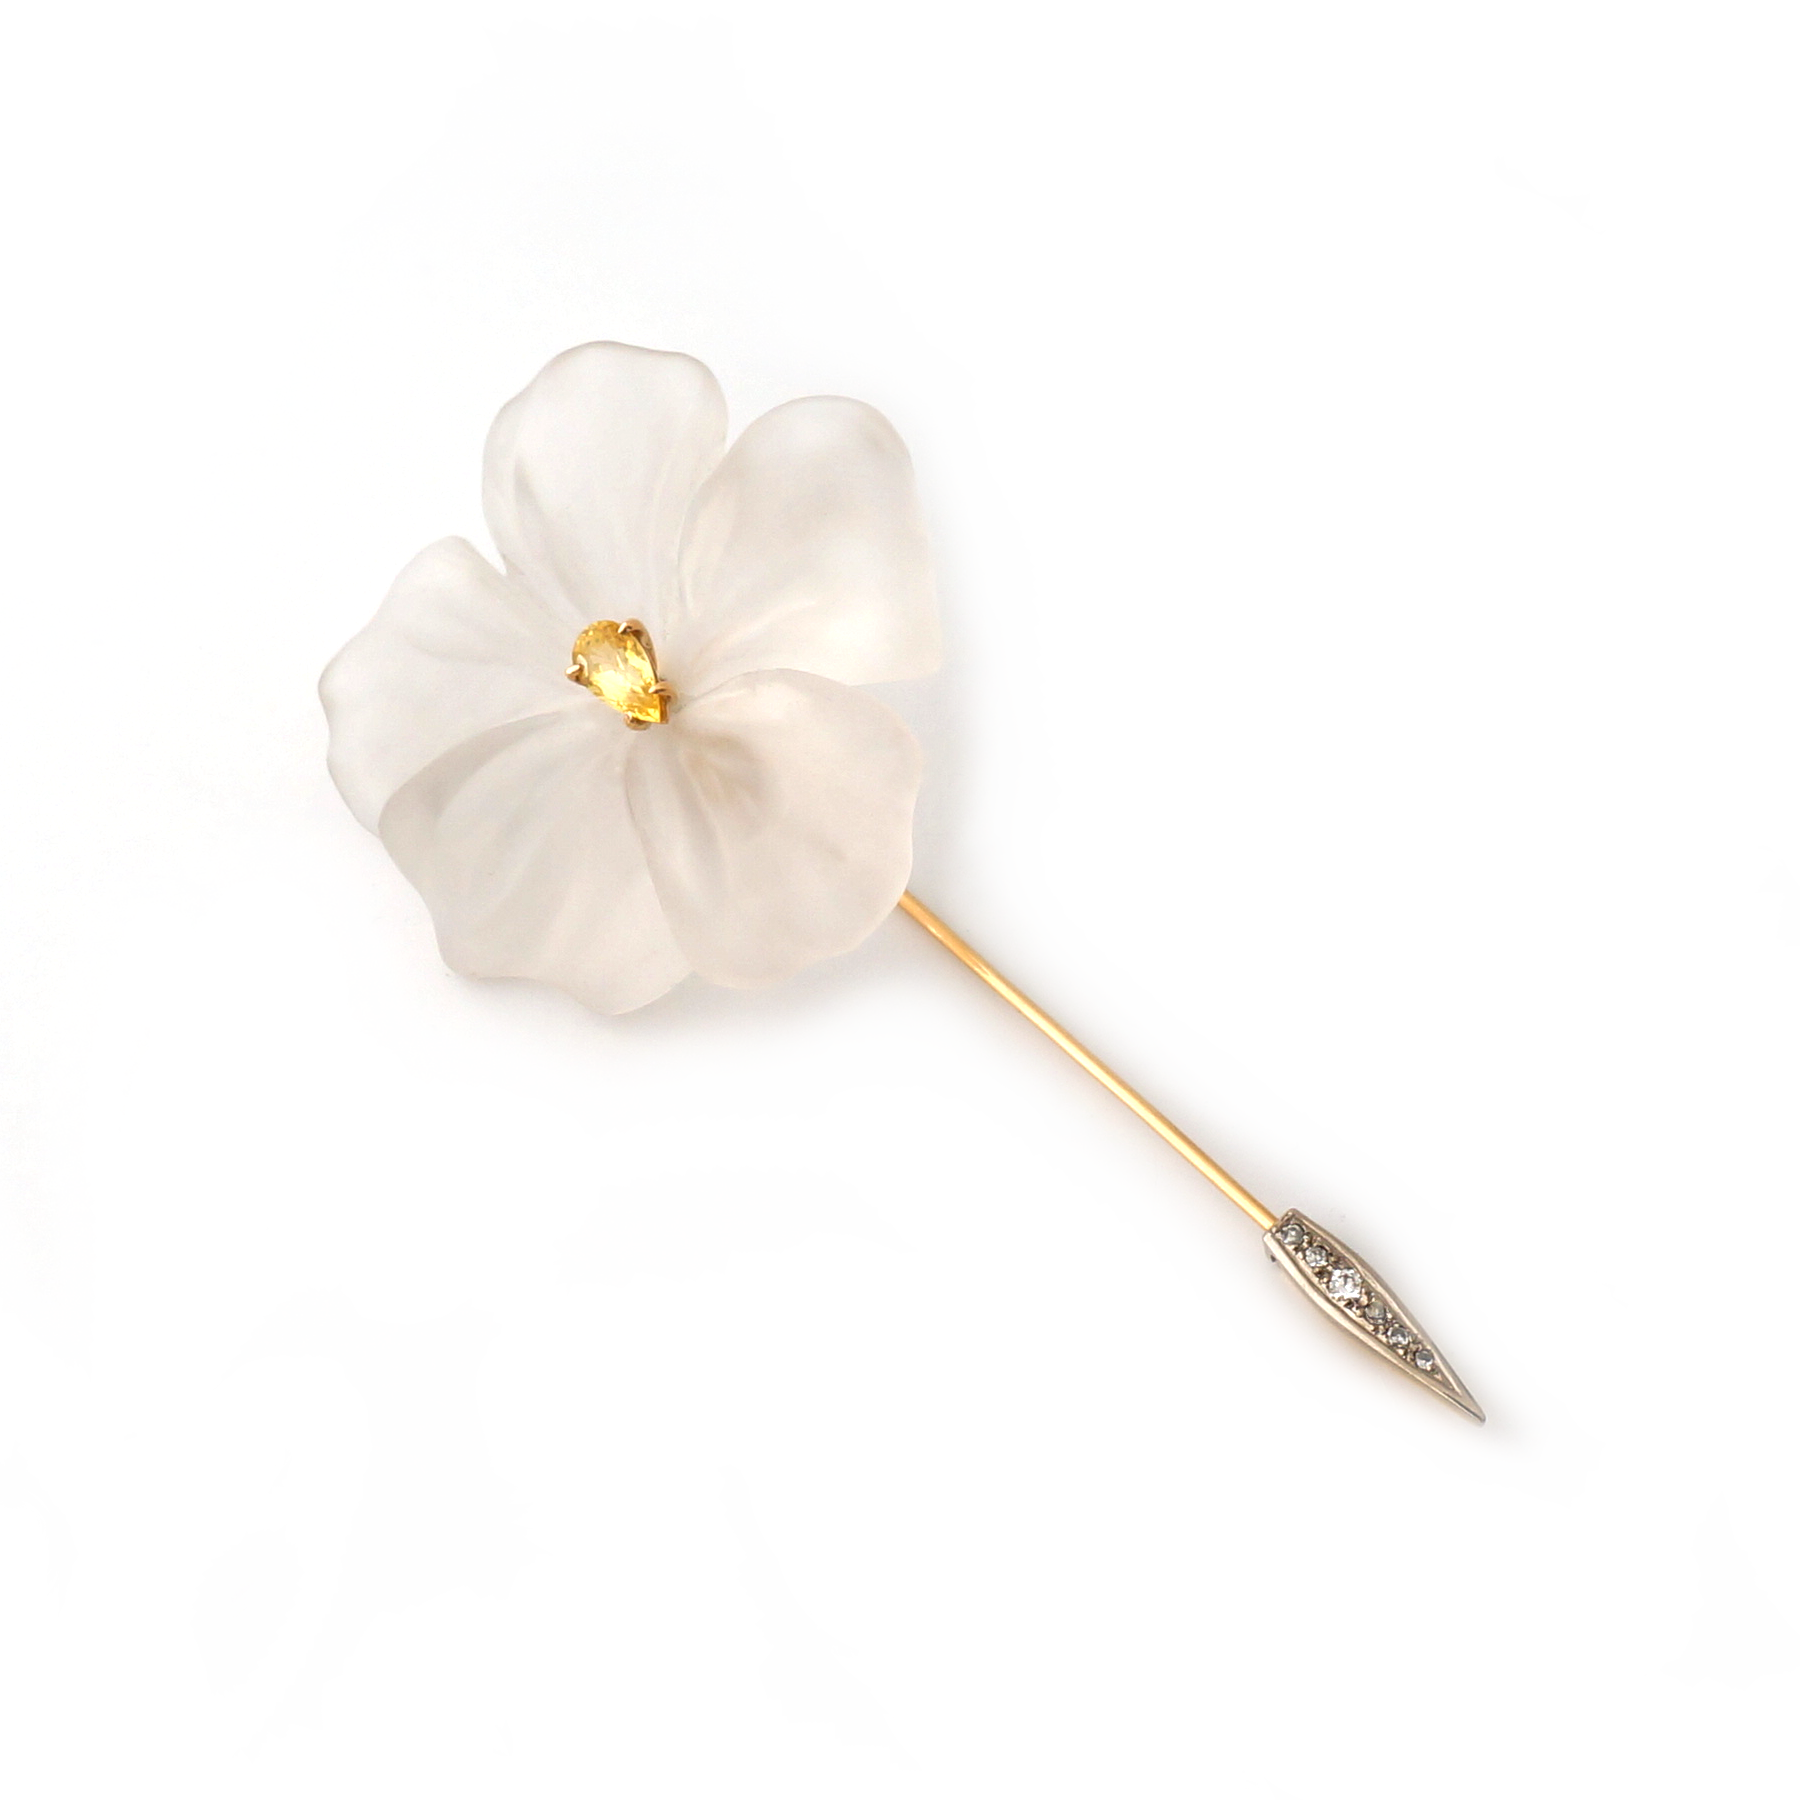 18K gold flower pin with hand-carved rock crystal with white diamonds by Ewa Z. Sleziona Jewels